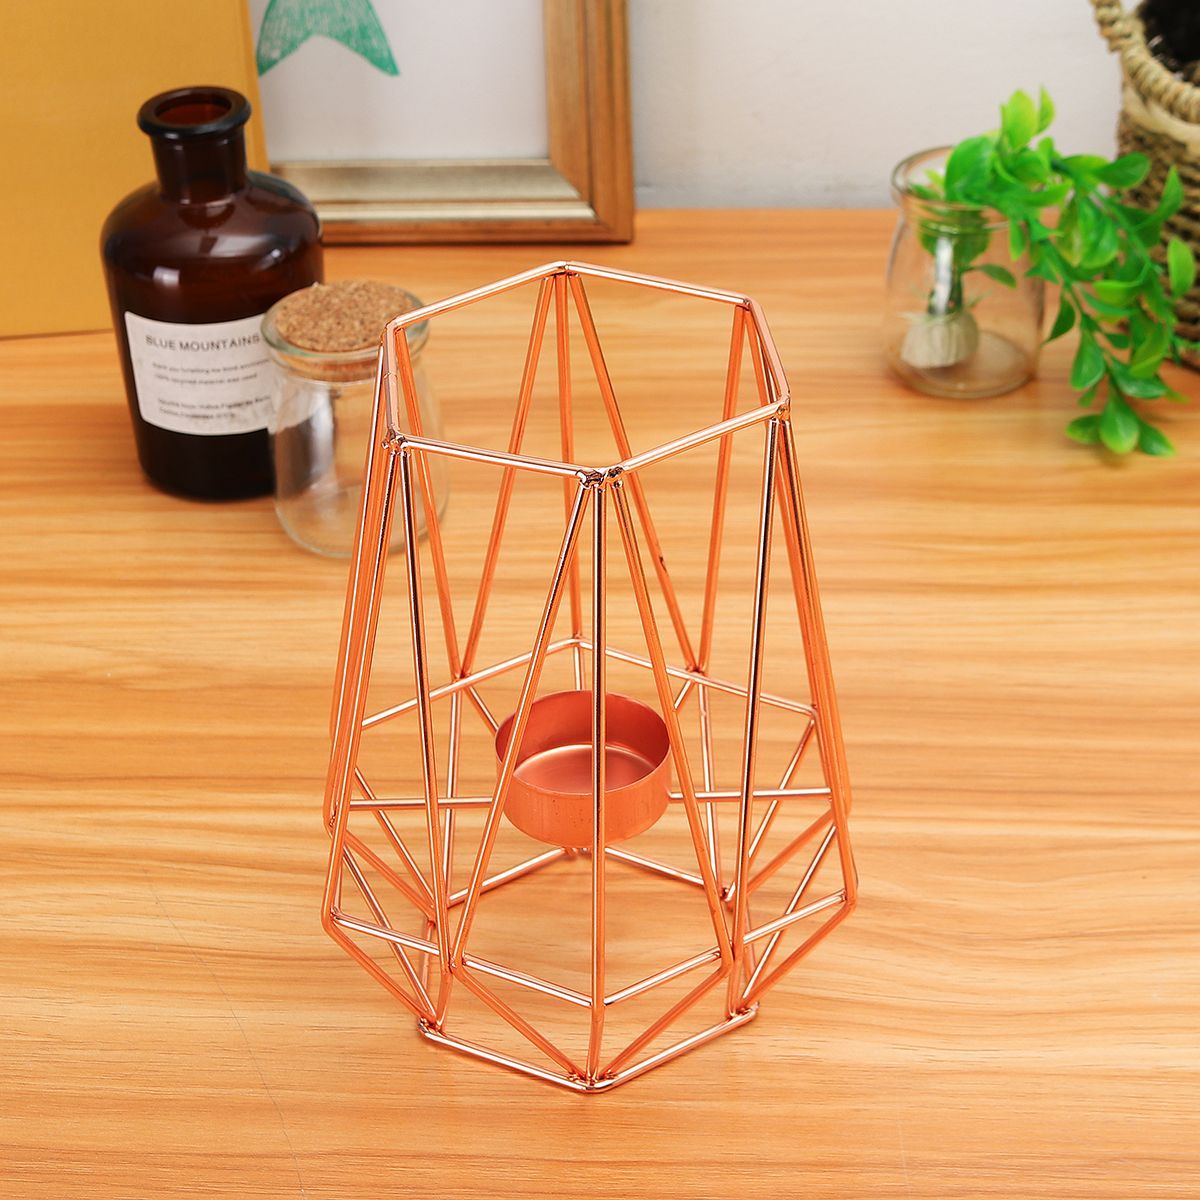 Geometric-Candlestick-Metal-Iron-Candle-Holder-Wedding-Home-Decorations-Nordic-Style-1493157